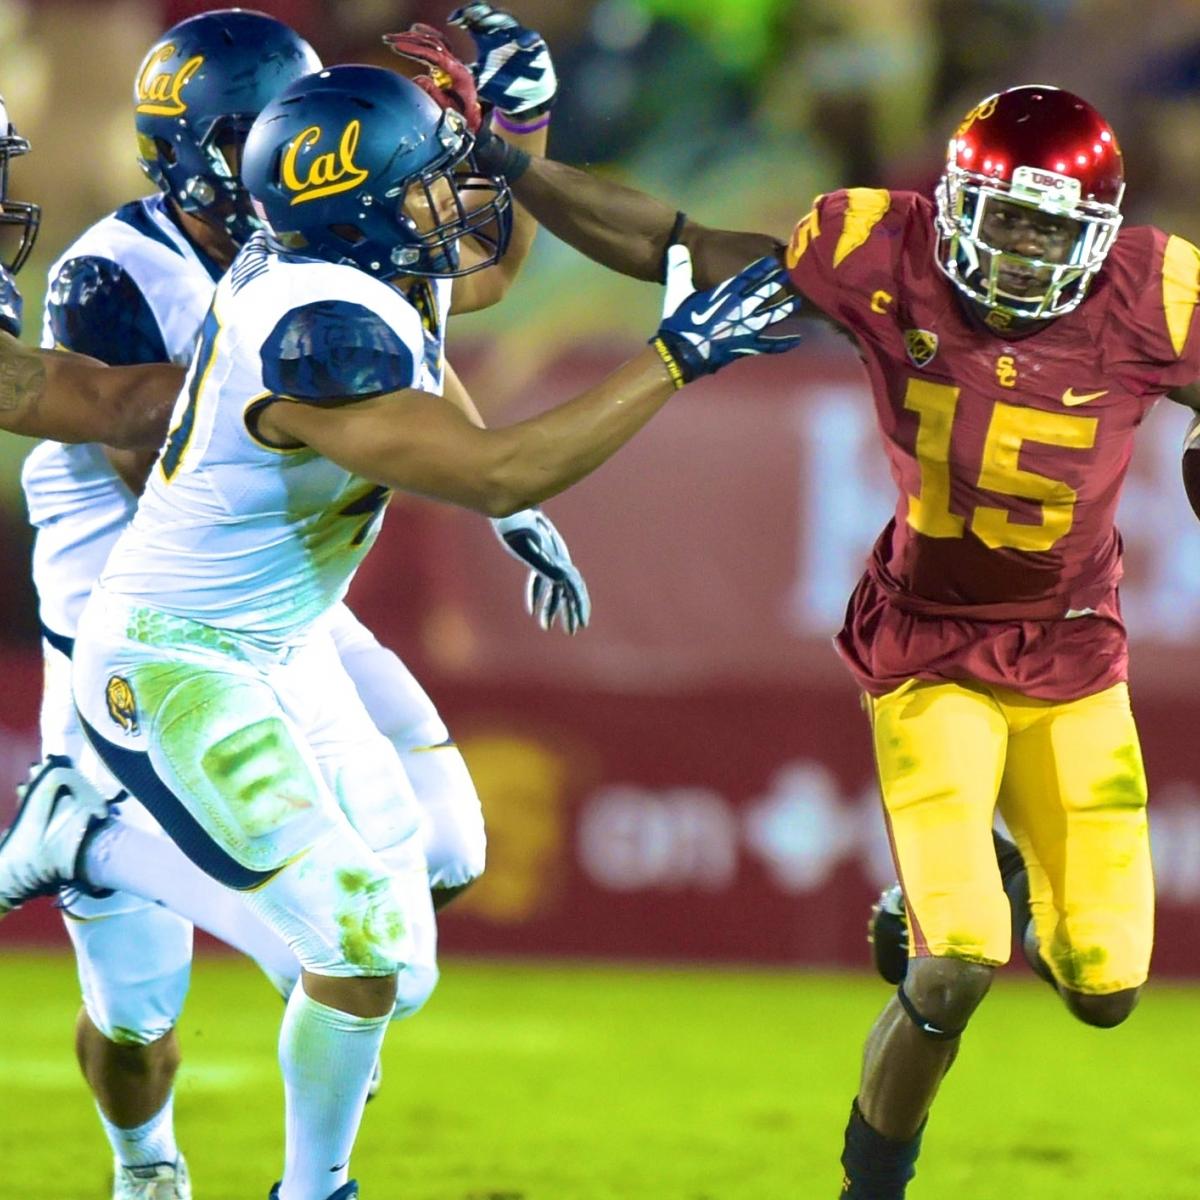 Cal vs. USC Score and Twitter Reaction News, Scores, Highlights